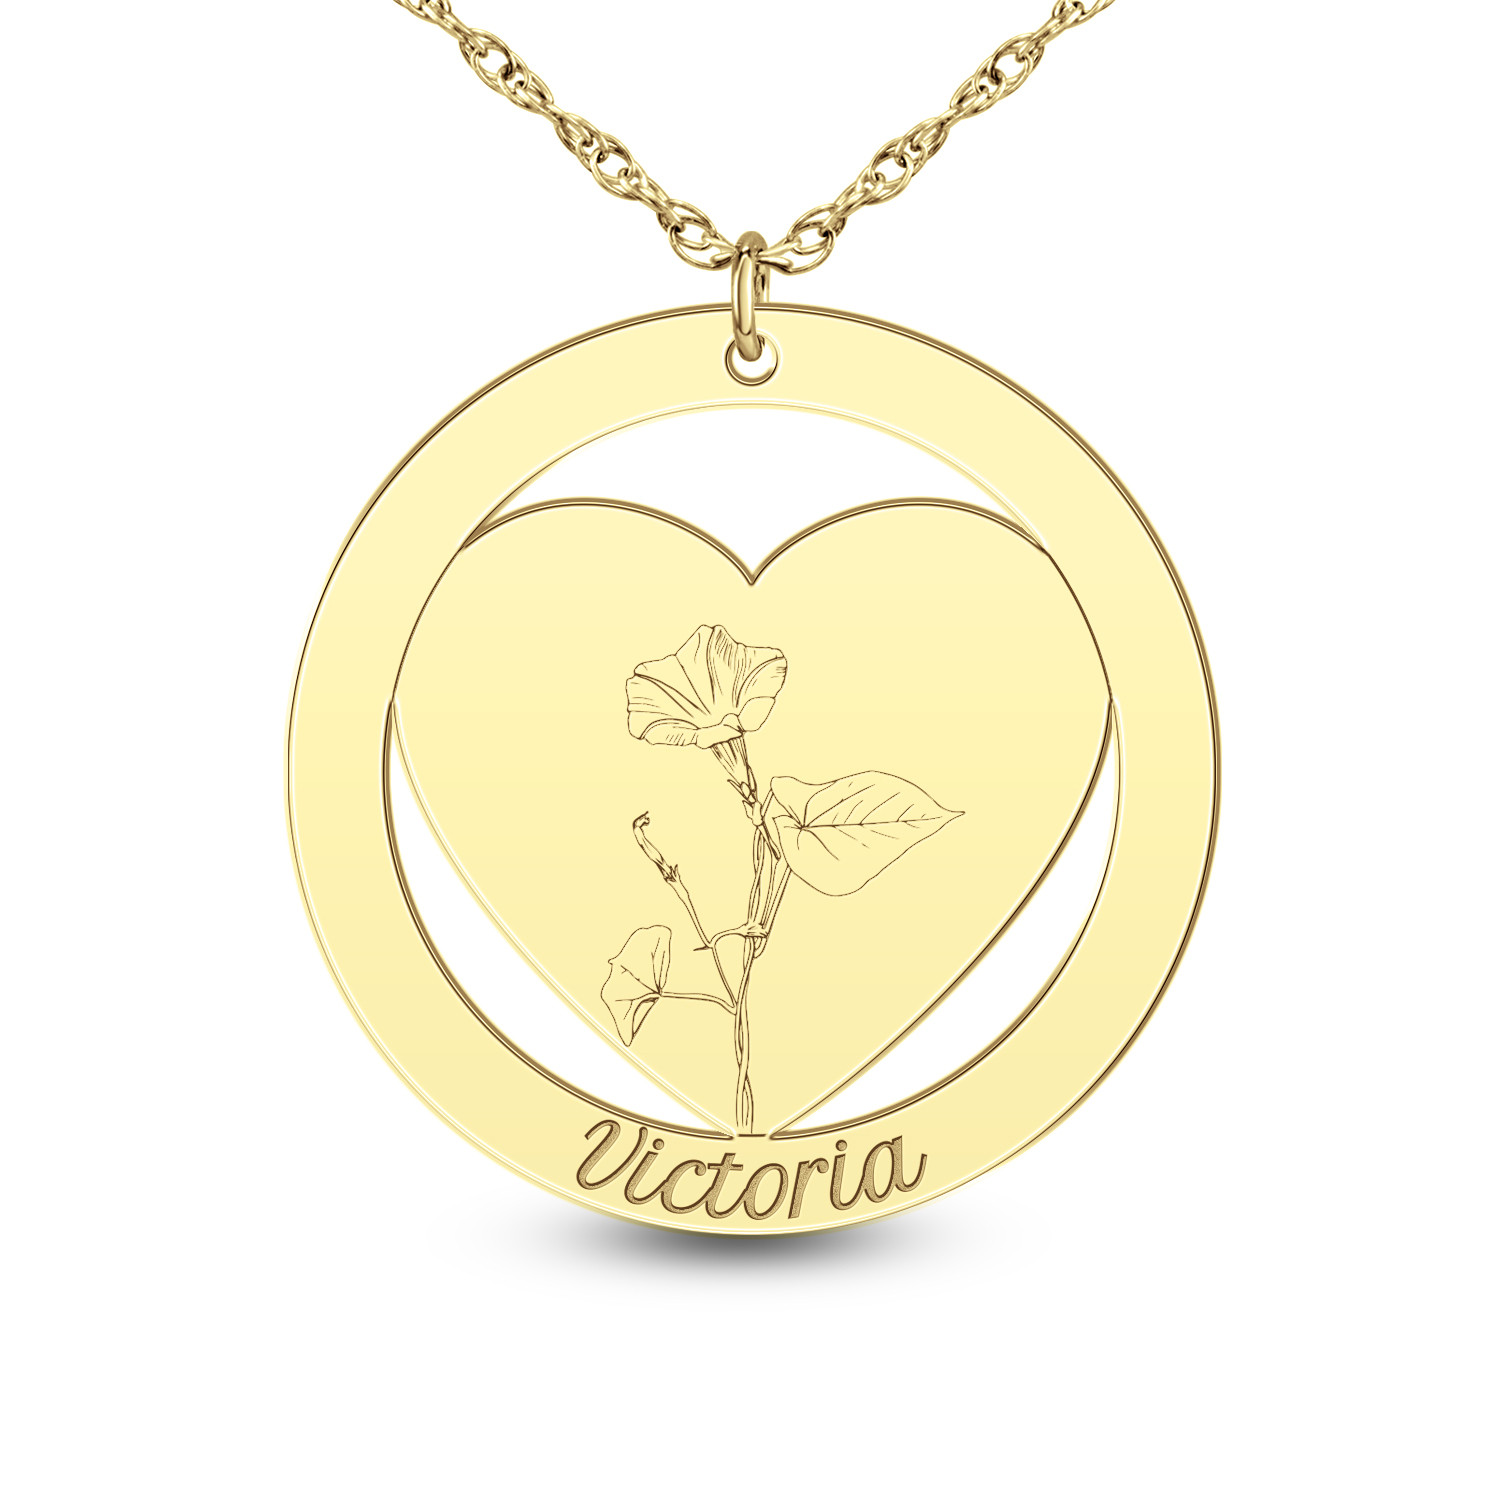 Trail necklace with 3 Specials flowers pendant cast in 18K rose